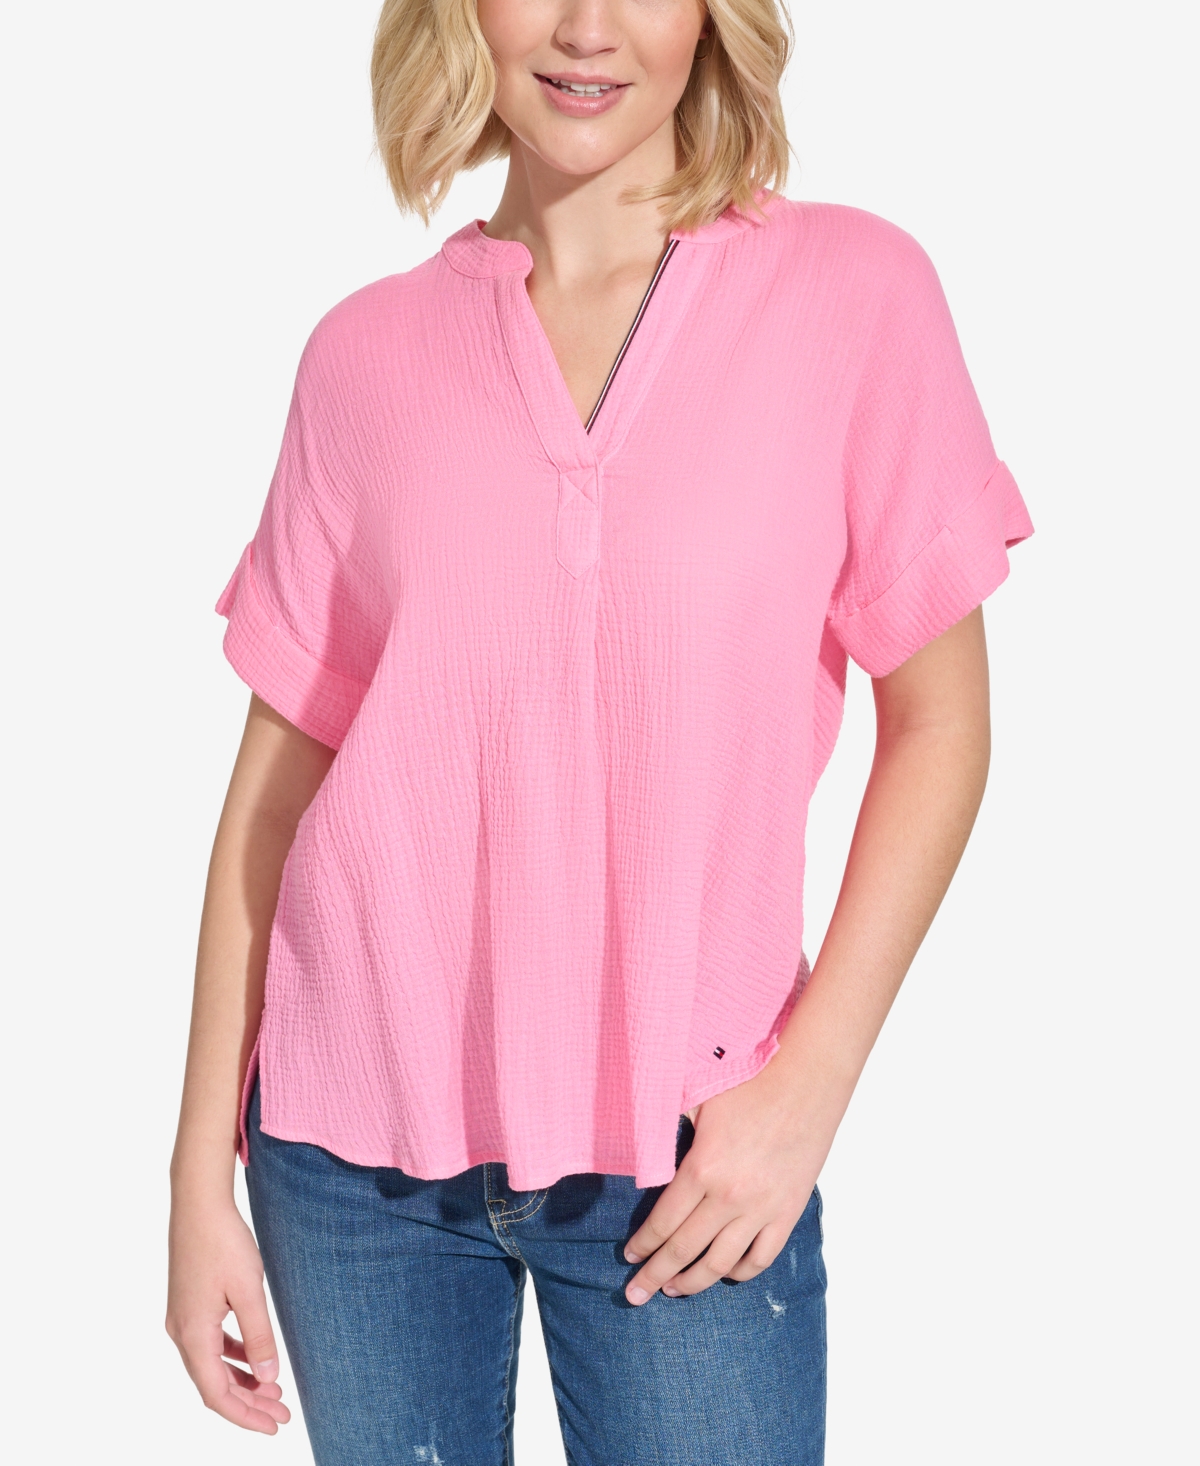 Tommy Hilfiger Women's Cotton Gauze Solid Popover Top In Peony